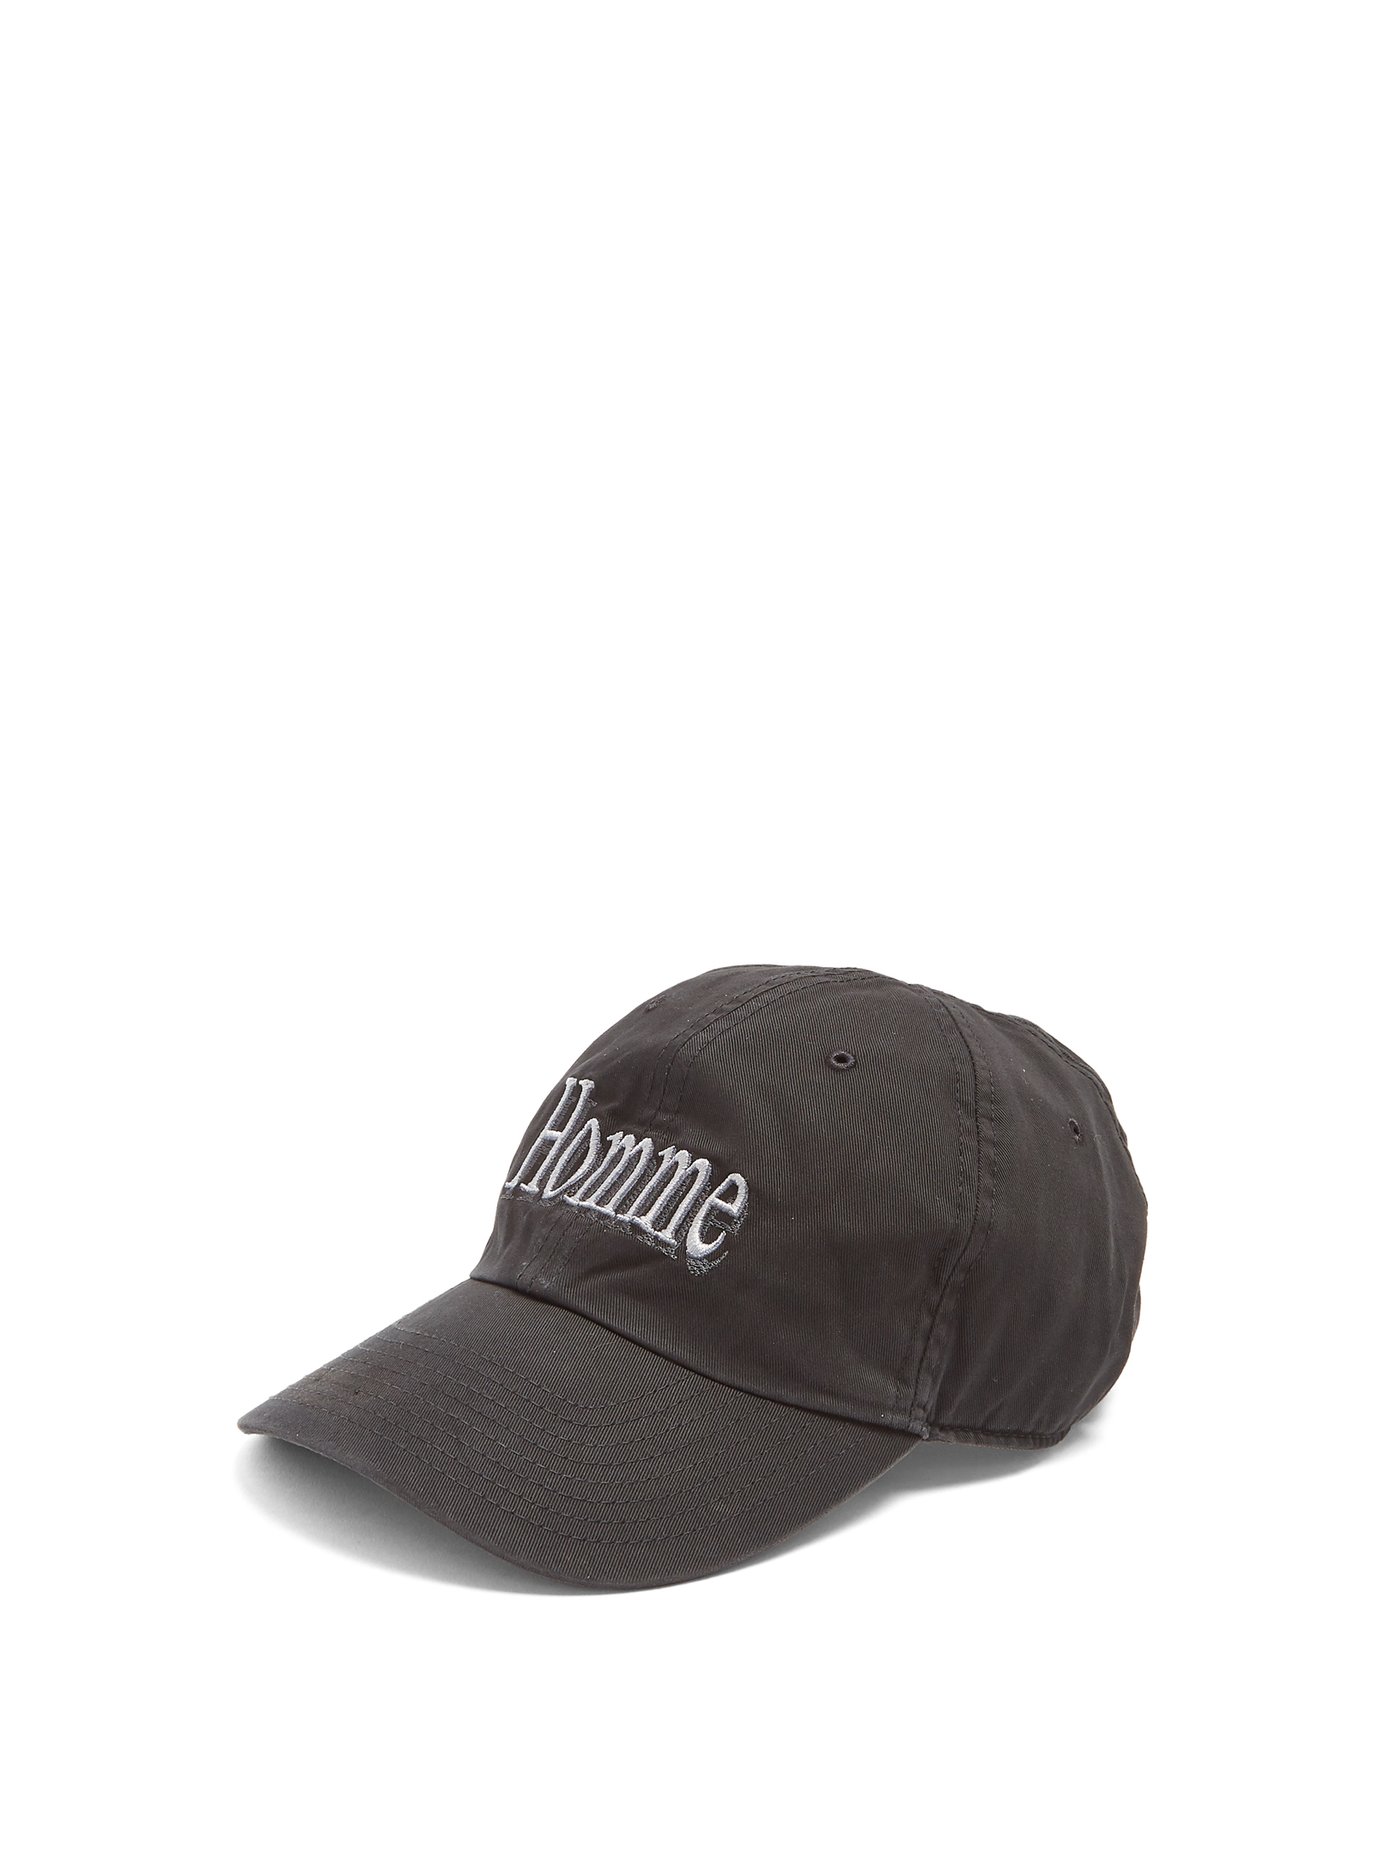 Homme-embroidered cotton-twill cap 